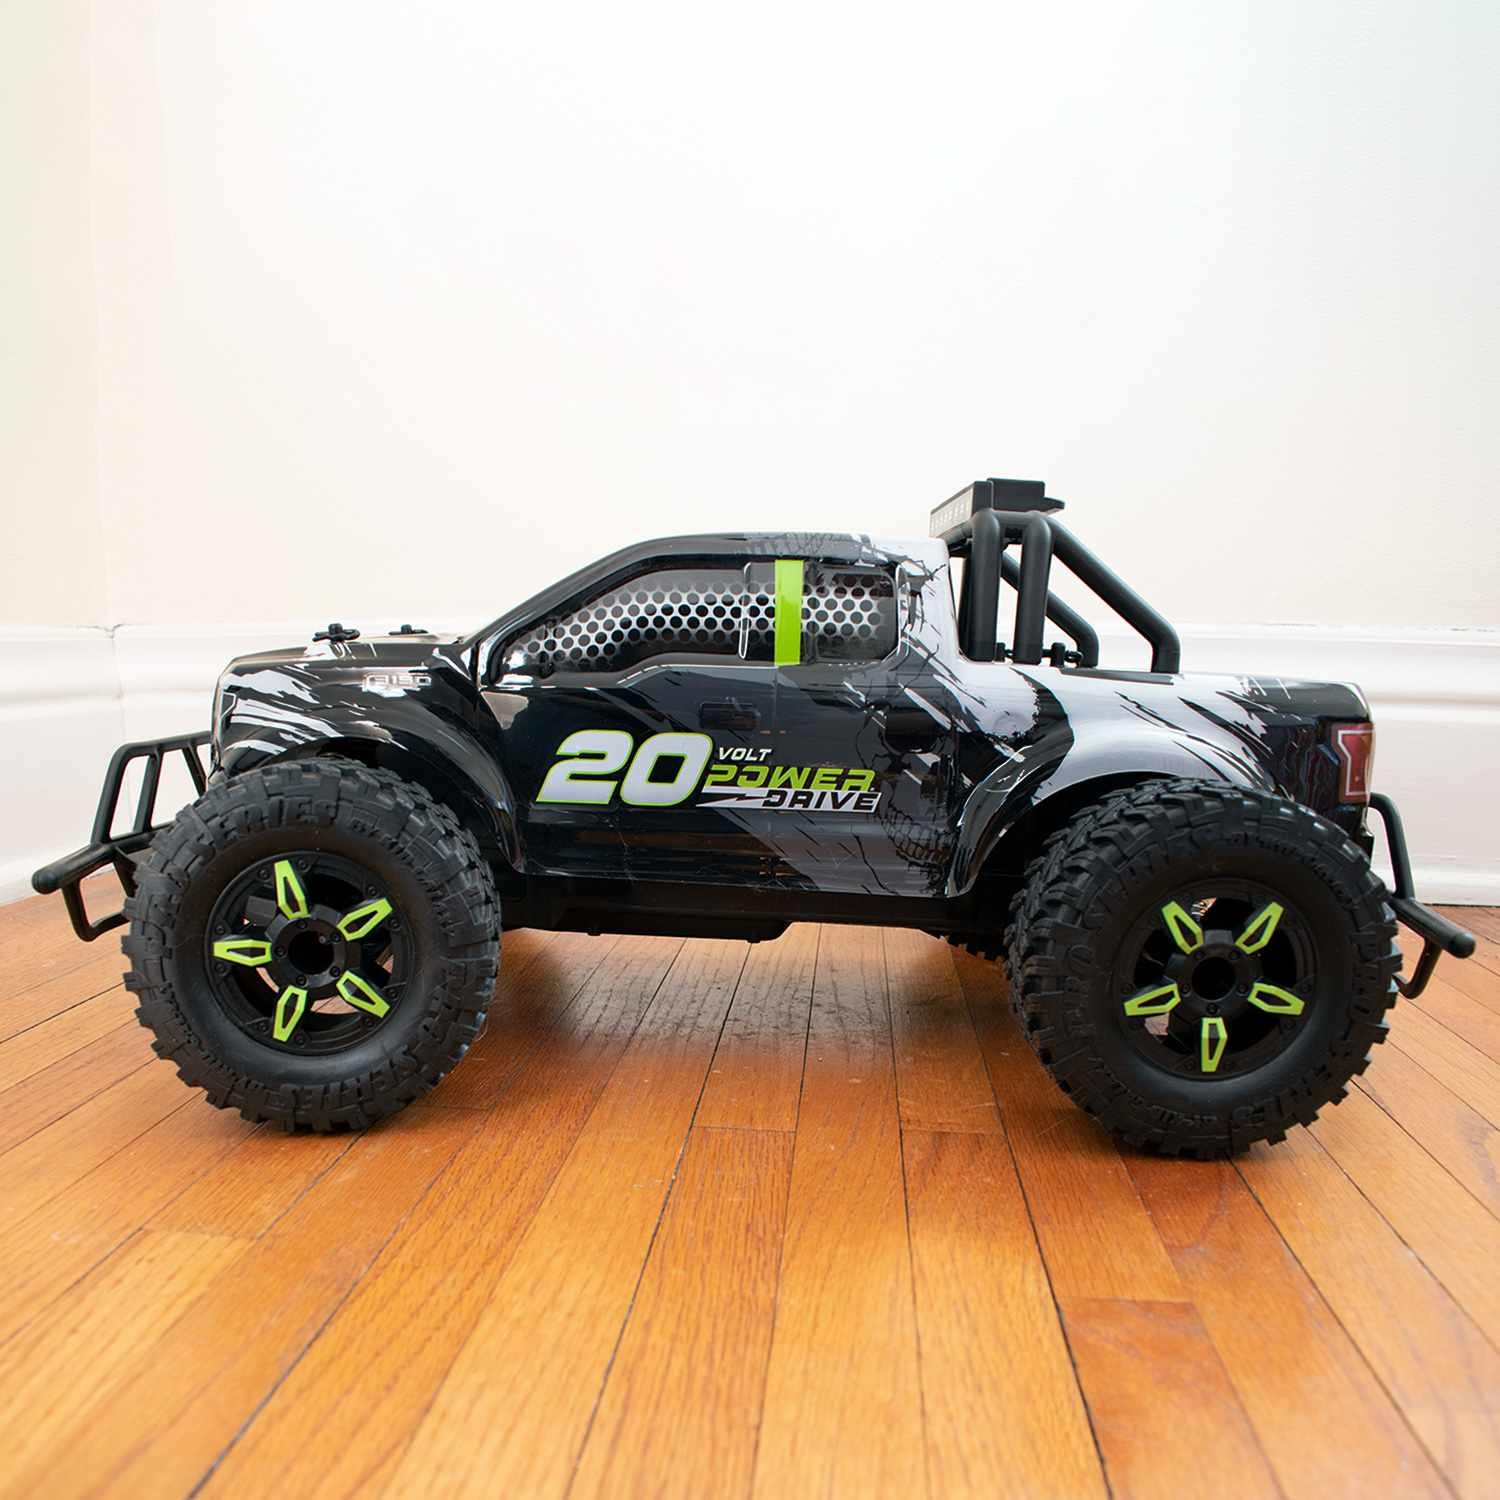 Ford Rc Car: Ford RC Car Design and Features